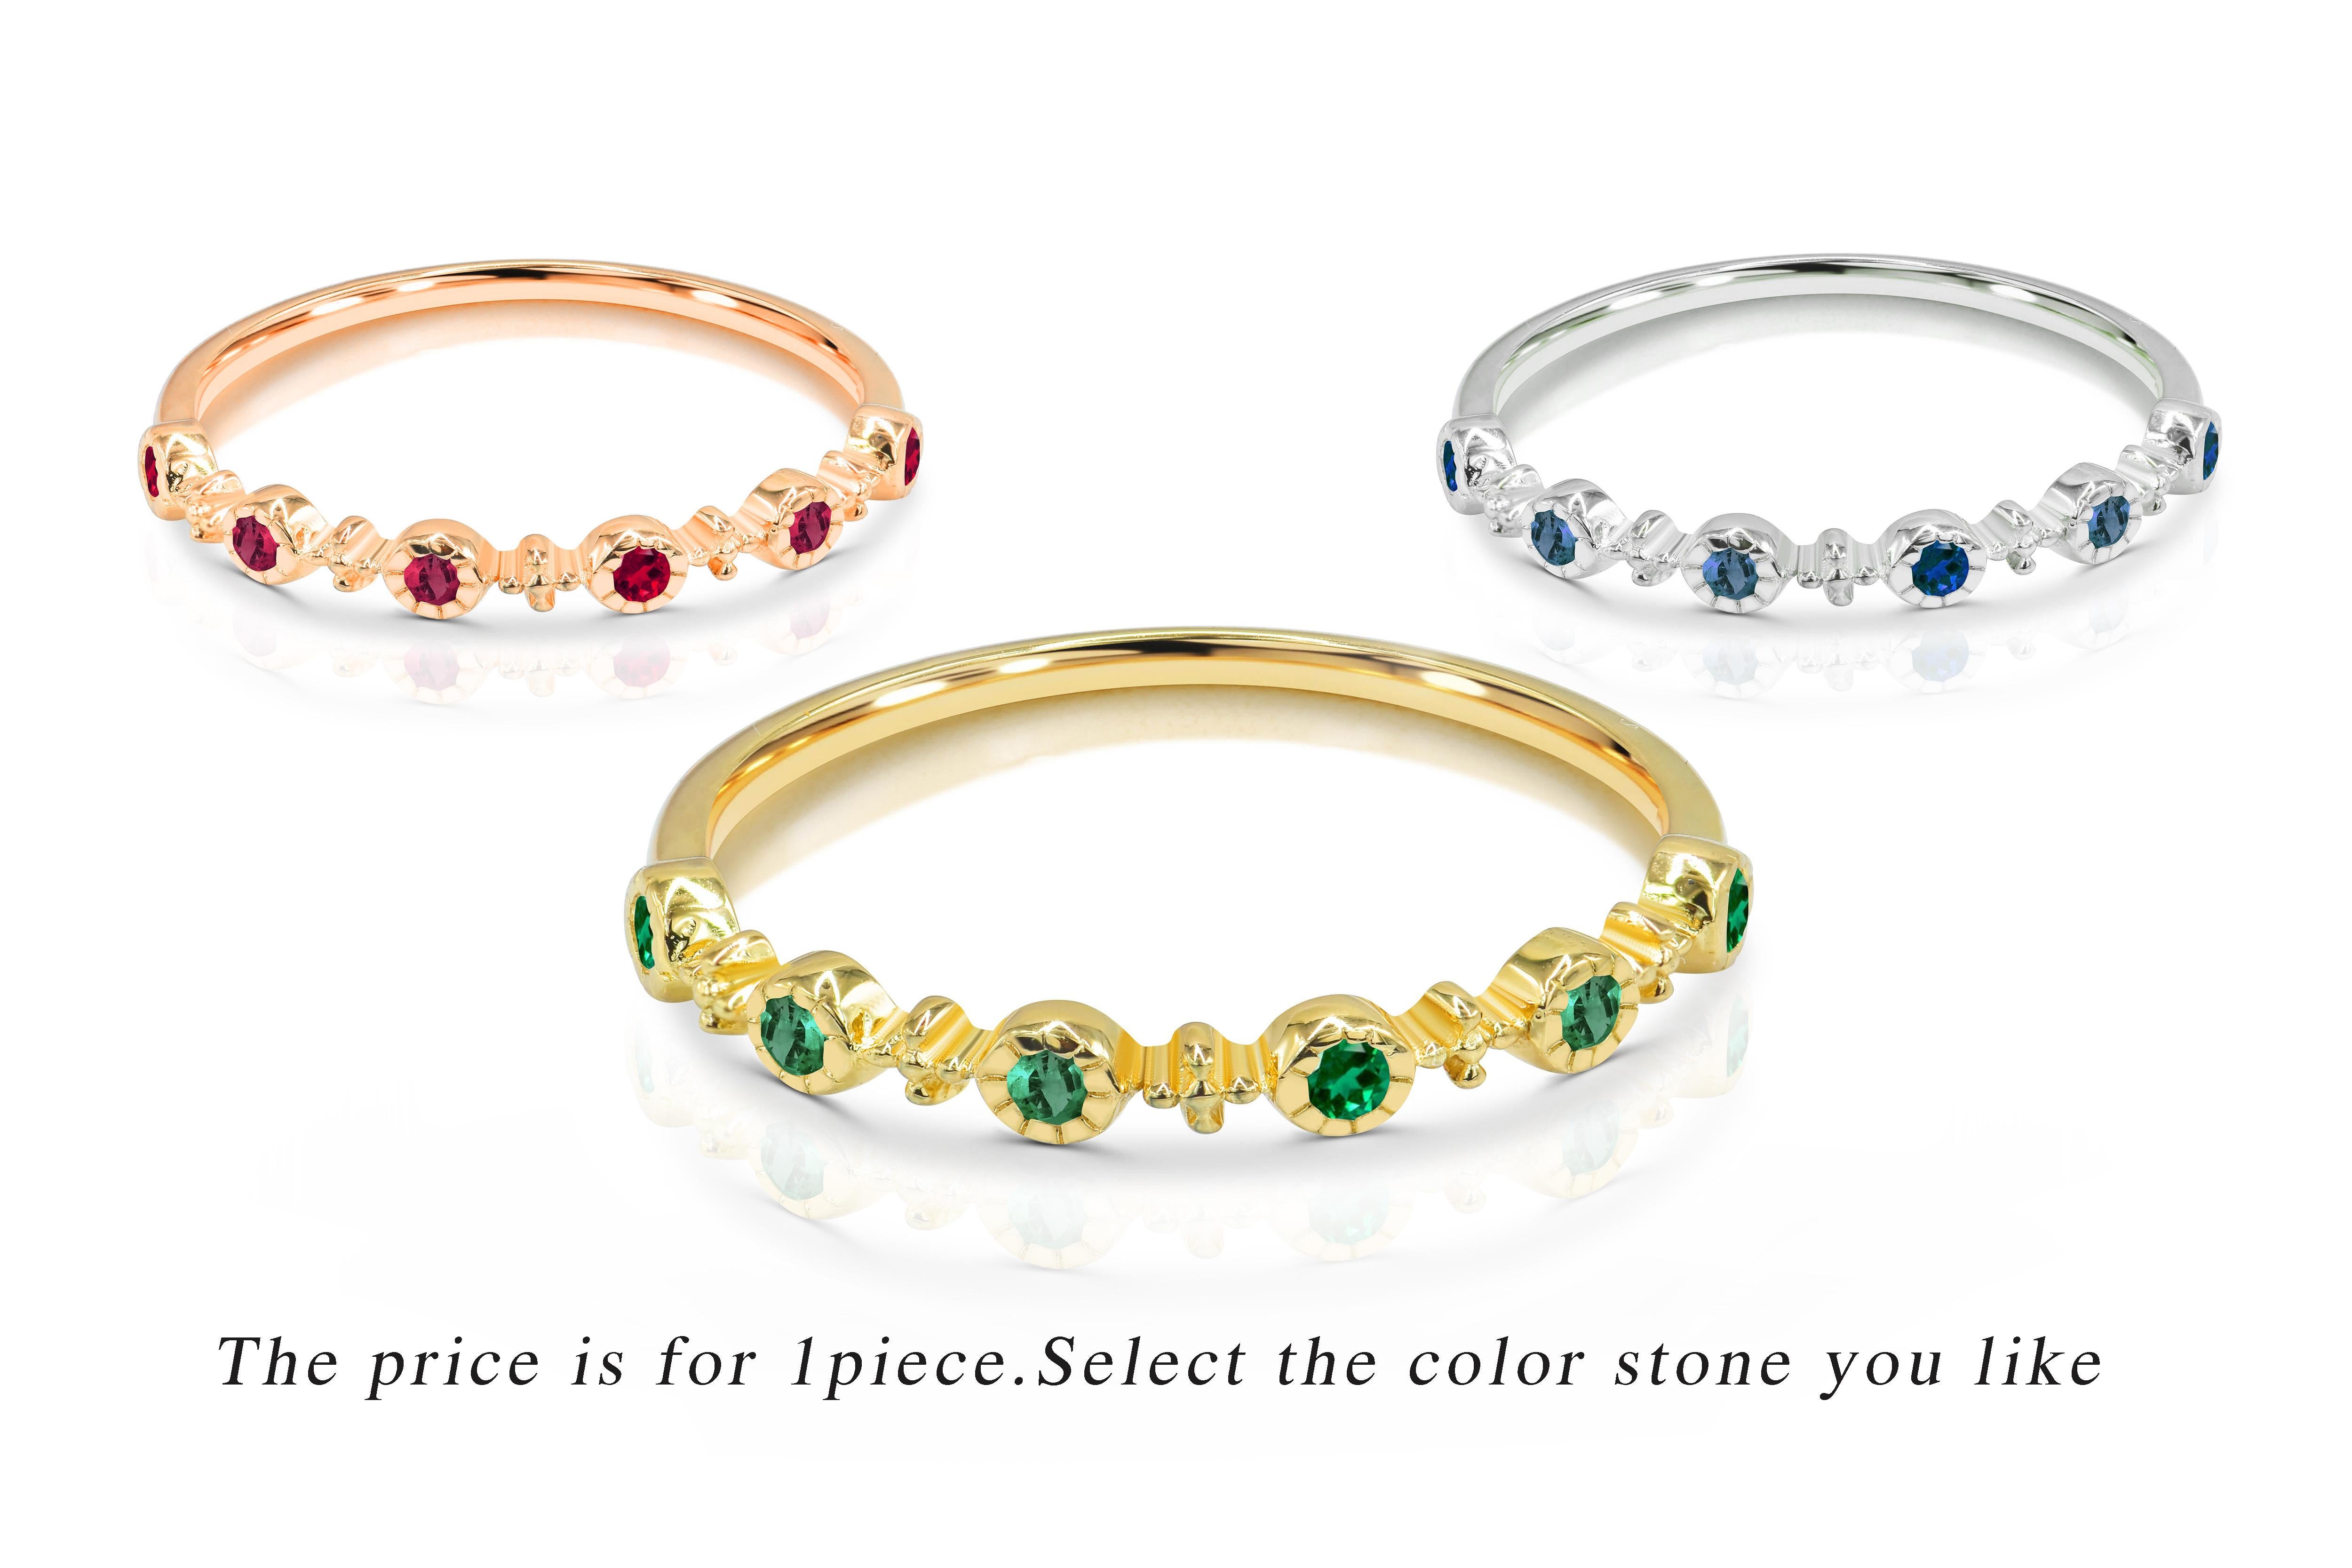 0.21 Ct Ruby, Emerald and Sapphire Ring in 14k Gold